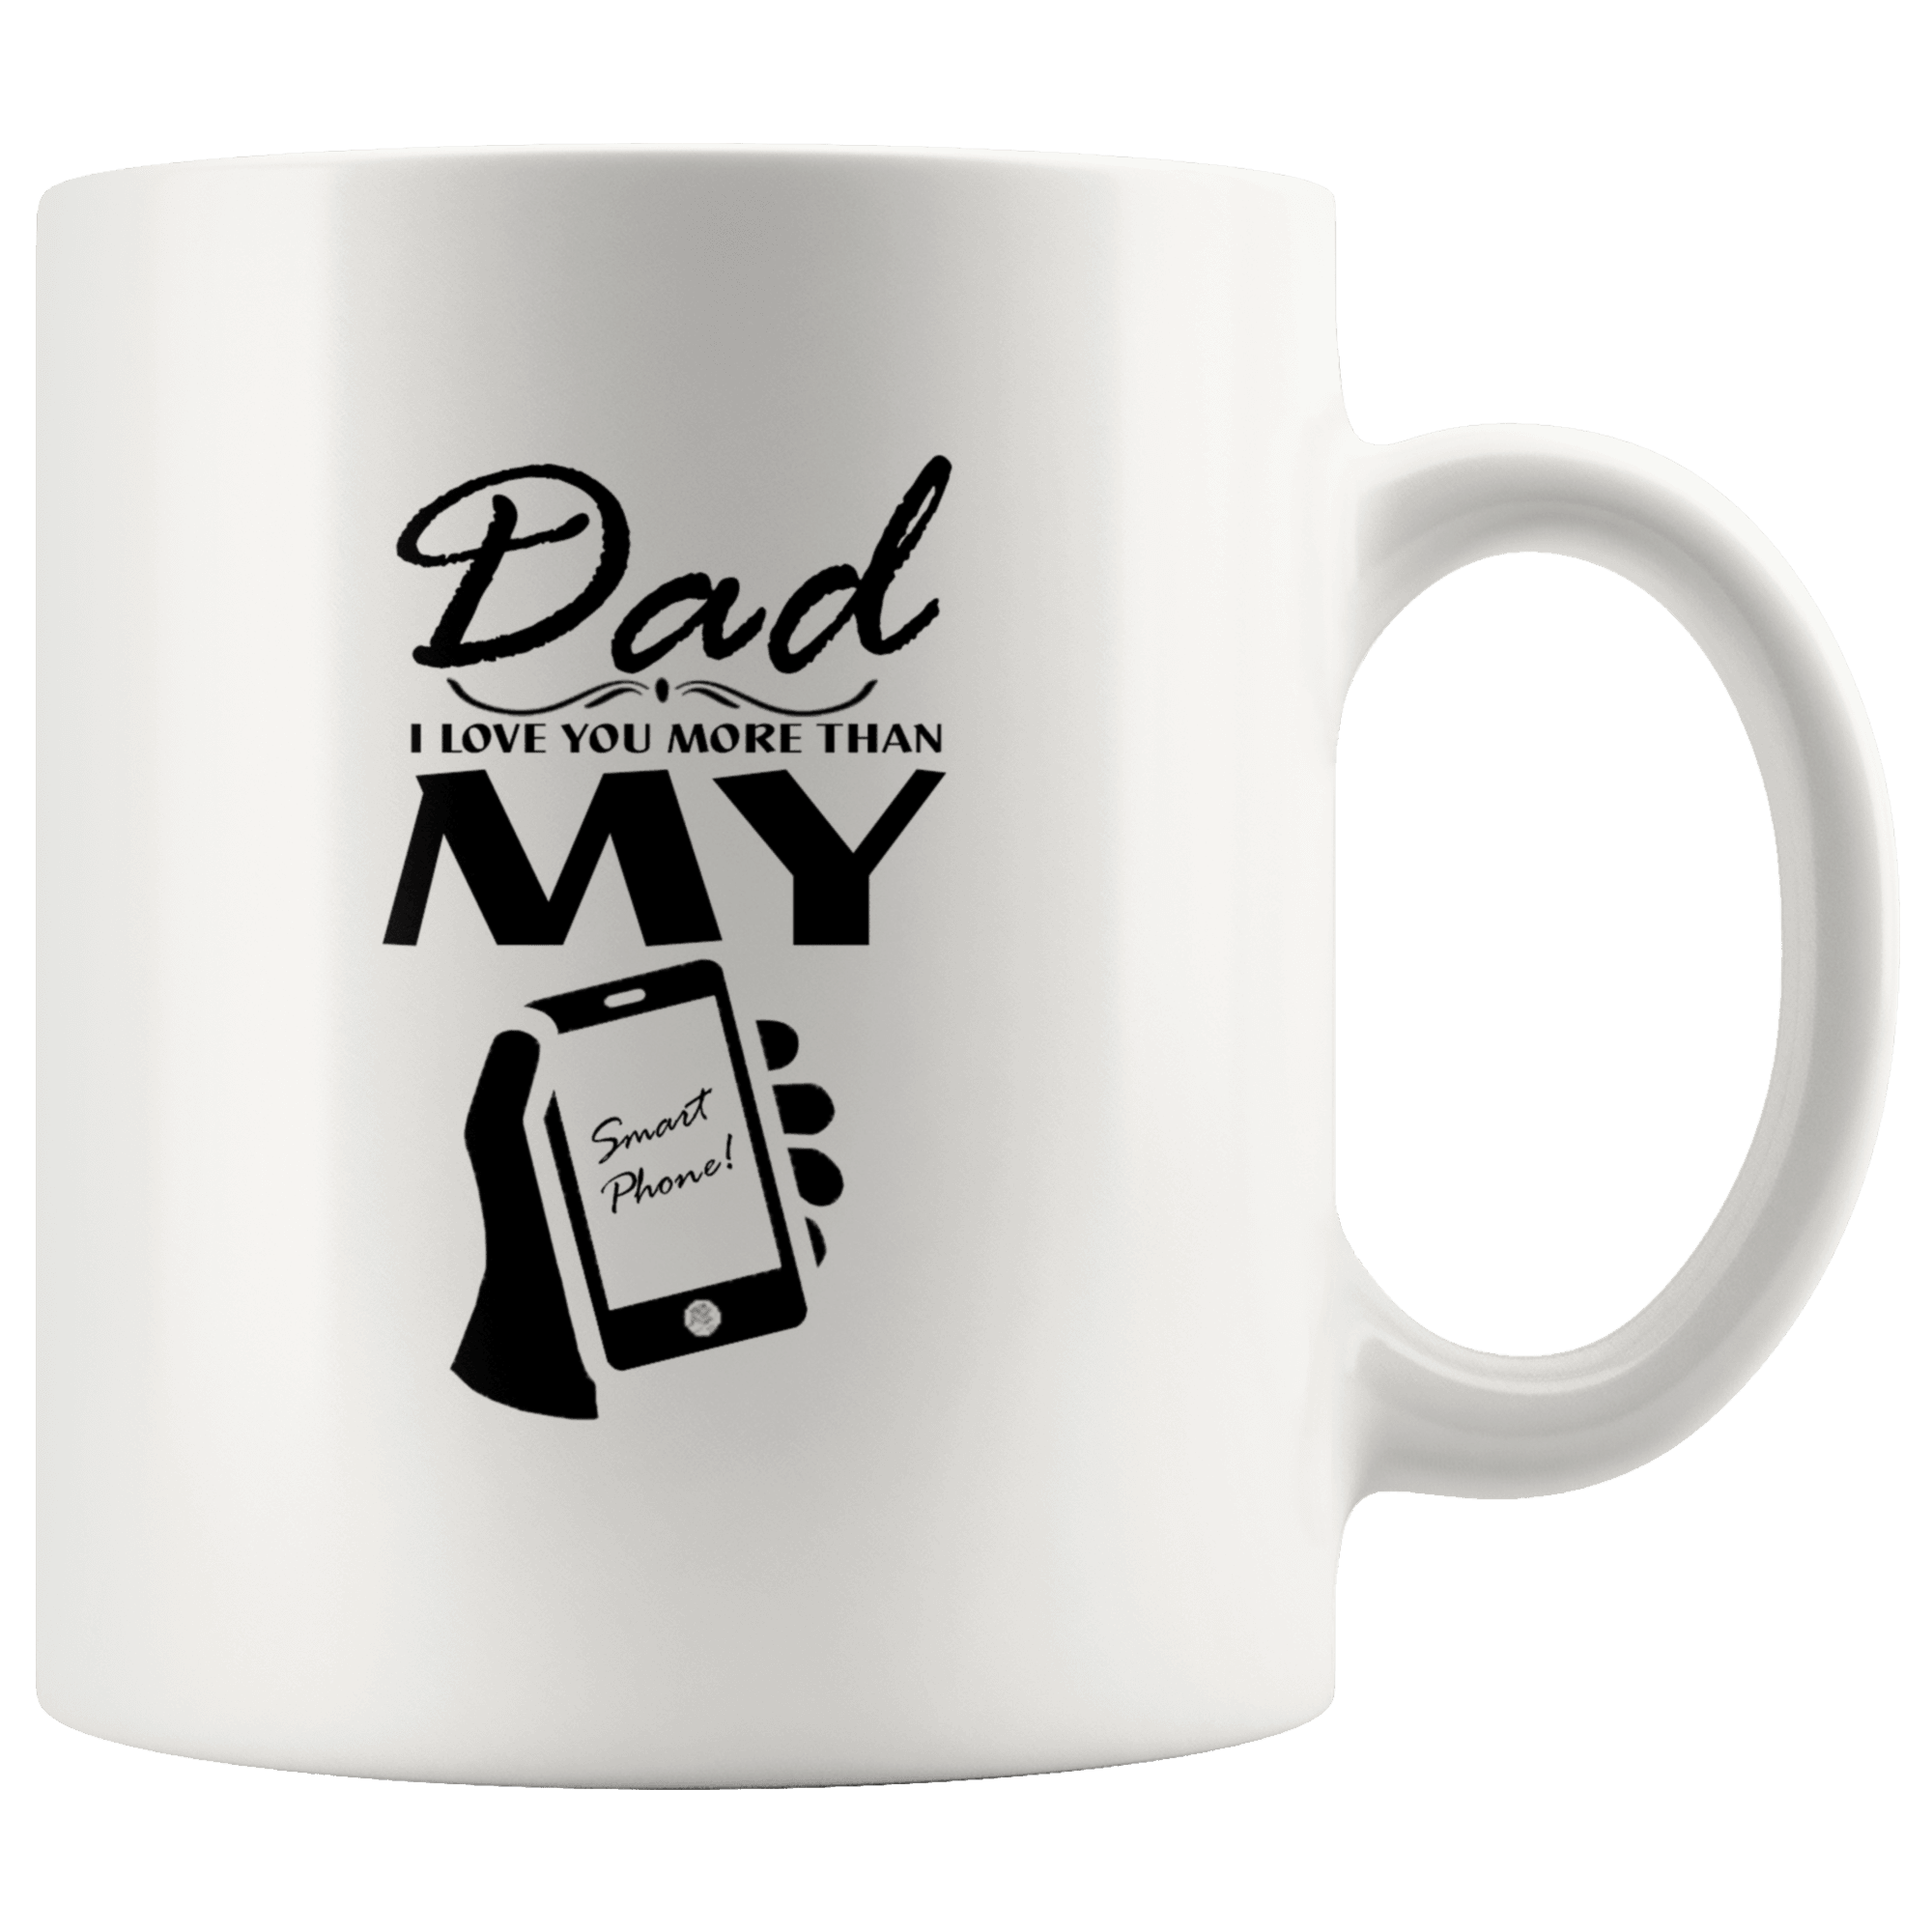 Great Coffee Mug For Father - Dad I Love You More Than My Smart Phone - SPCM